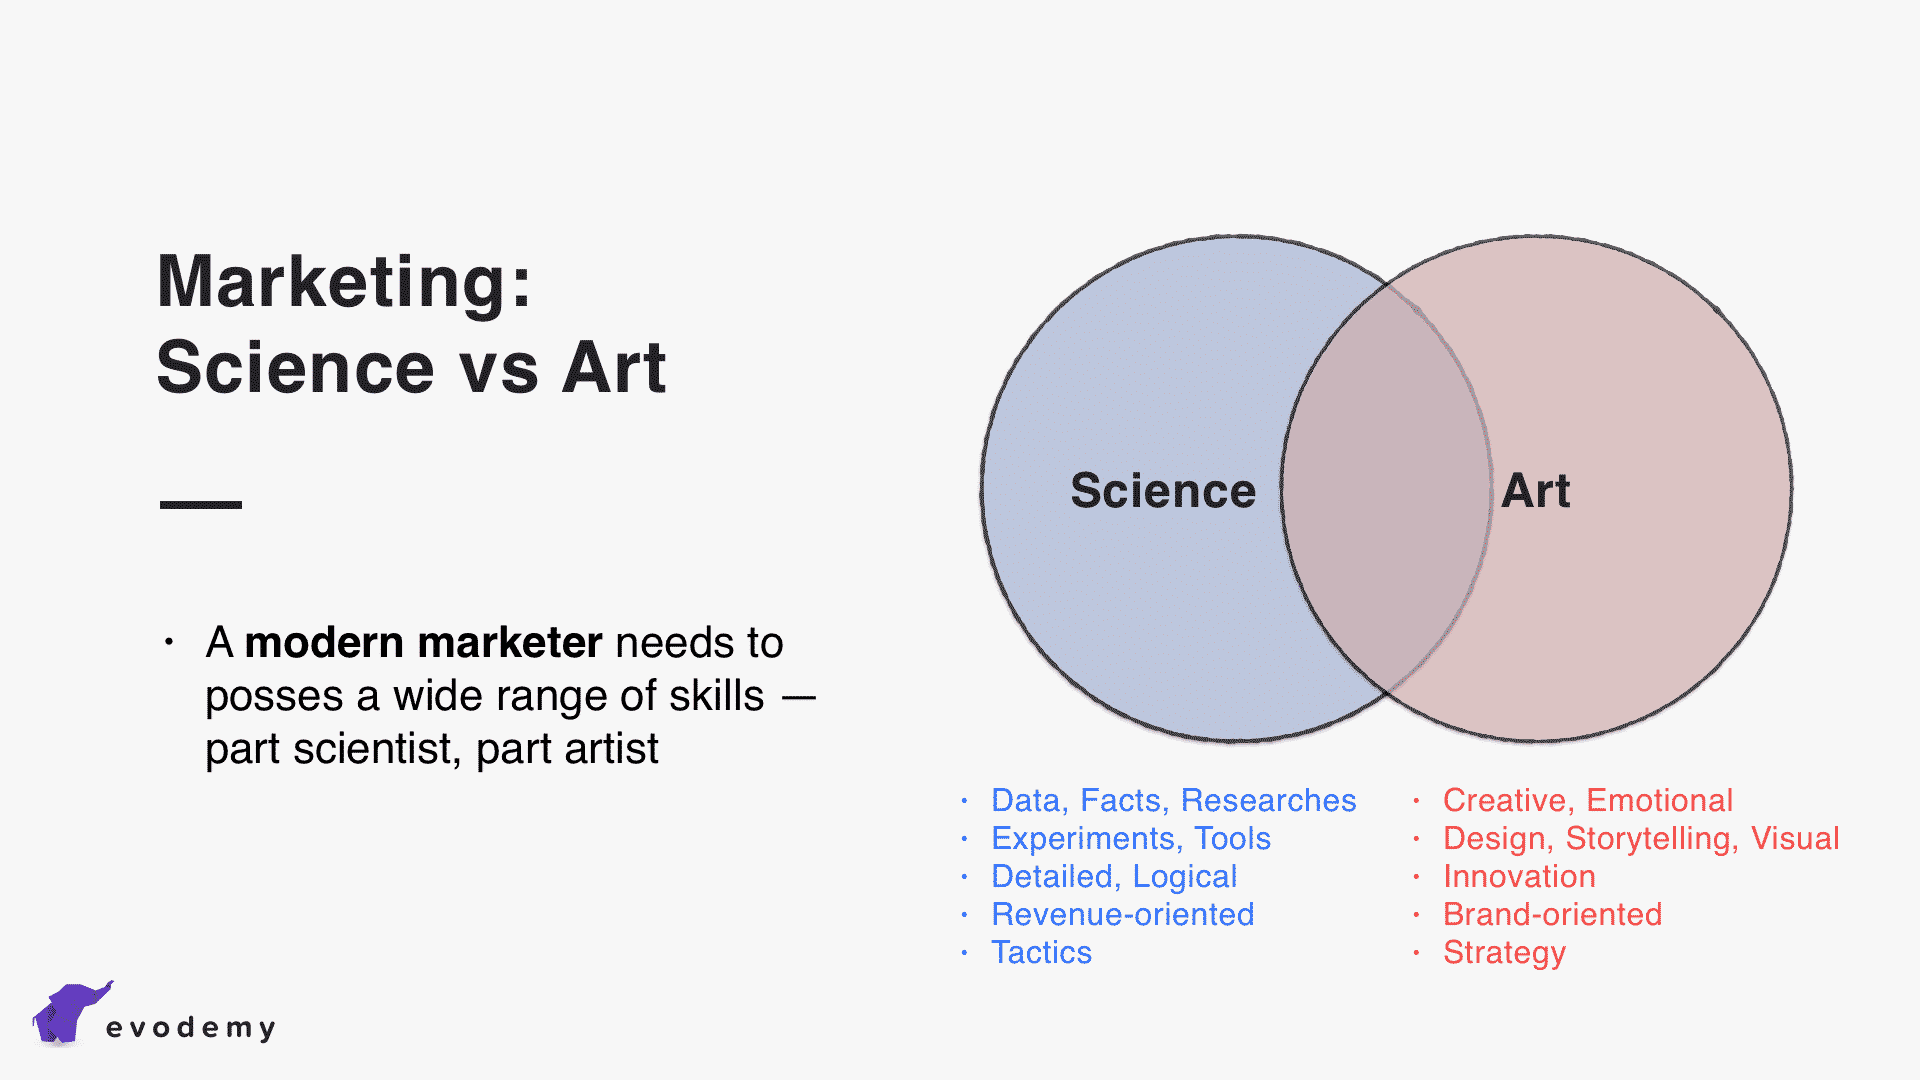 Is Marketing Science or Art?